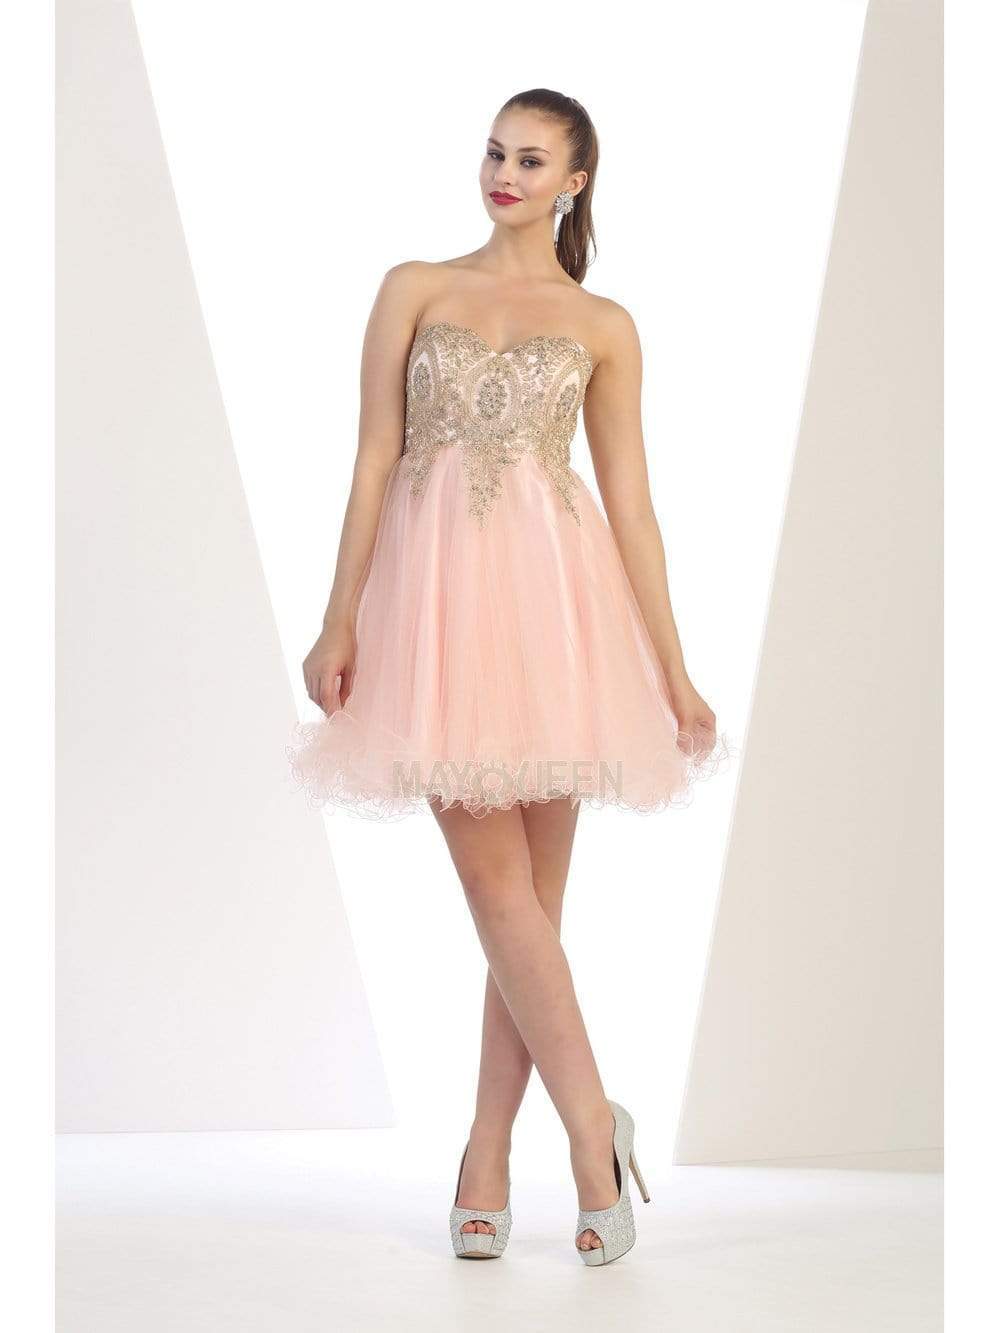 May Queen - MQ1414 Lace Appliqued Strapless Sweetheart Cocktail Dress Homecoming Dresses 2 / Blush